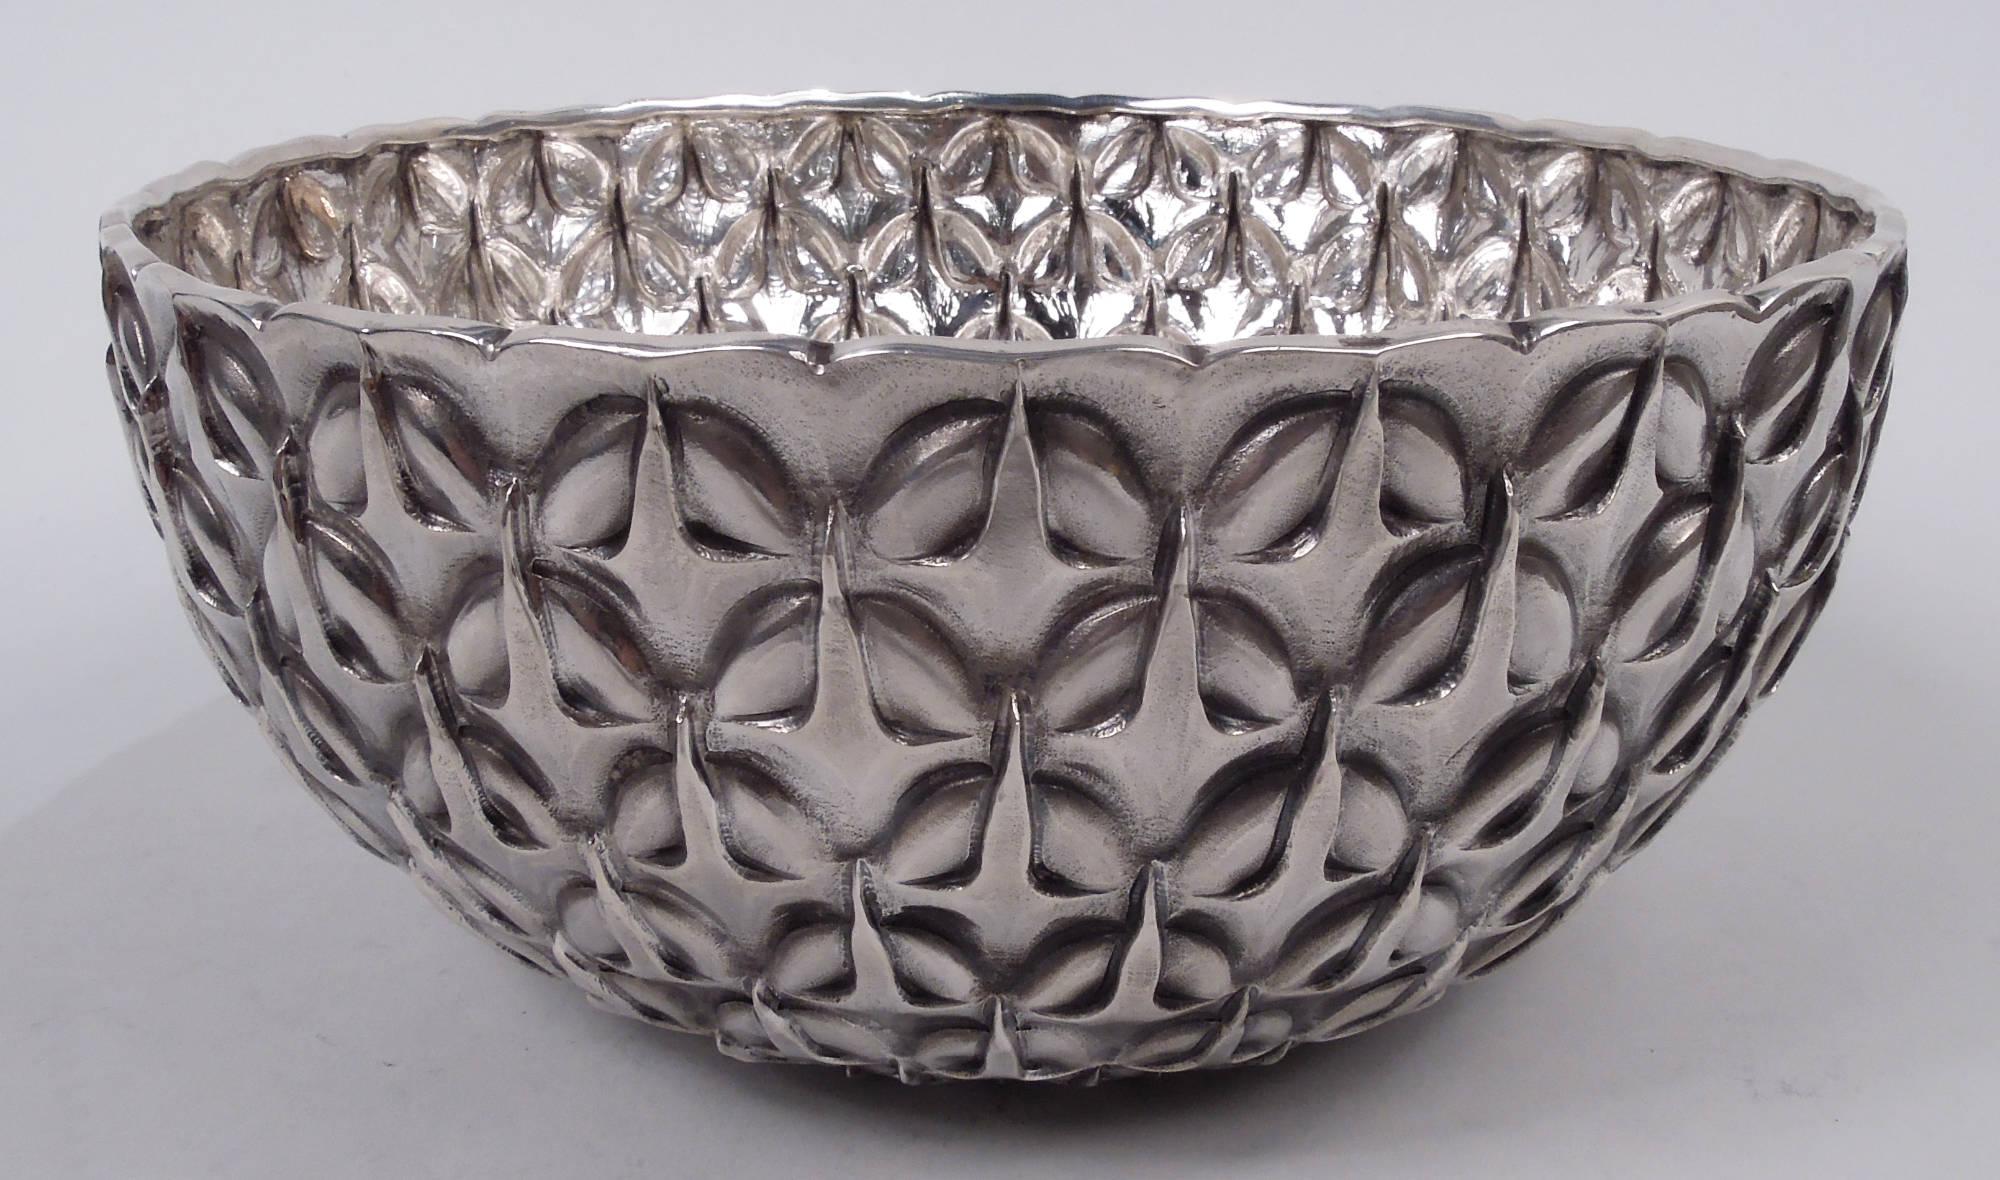 Striking Modern Classical sterling silver bowl. Retailed by Tiffany & Co. in New York. Round and curved. Chased imbricated and graduated egg-and-dart ornament. Tactile with beautiful shimmer. Marked “Tiffany & Co. / Sterling / Portugal”. Heavy